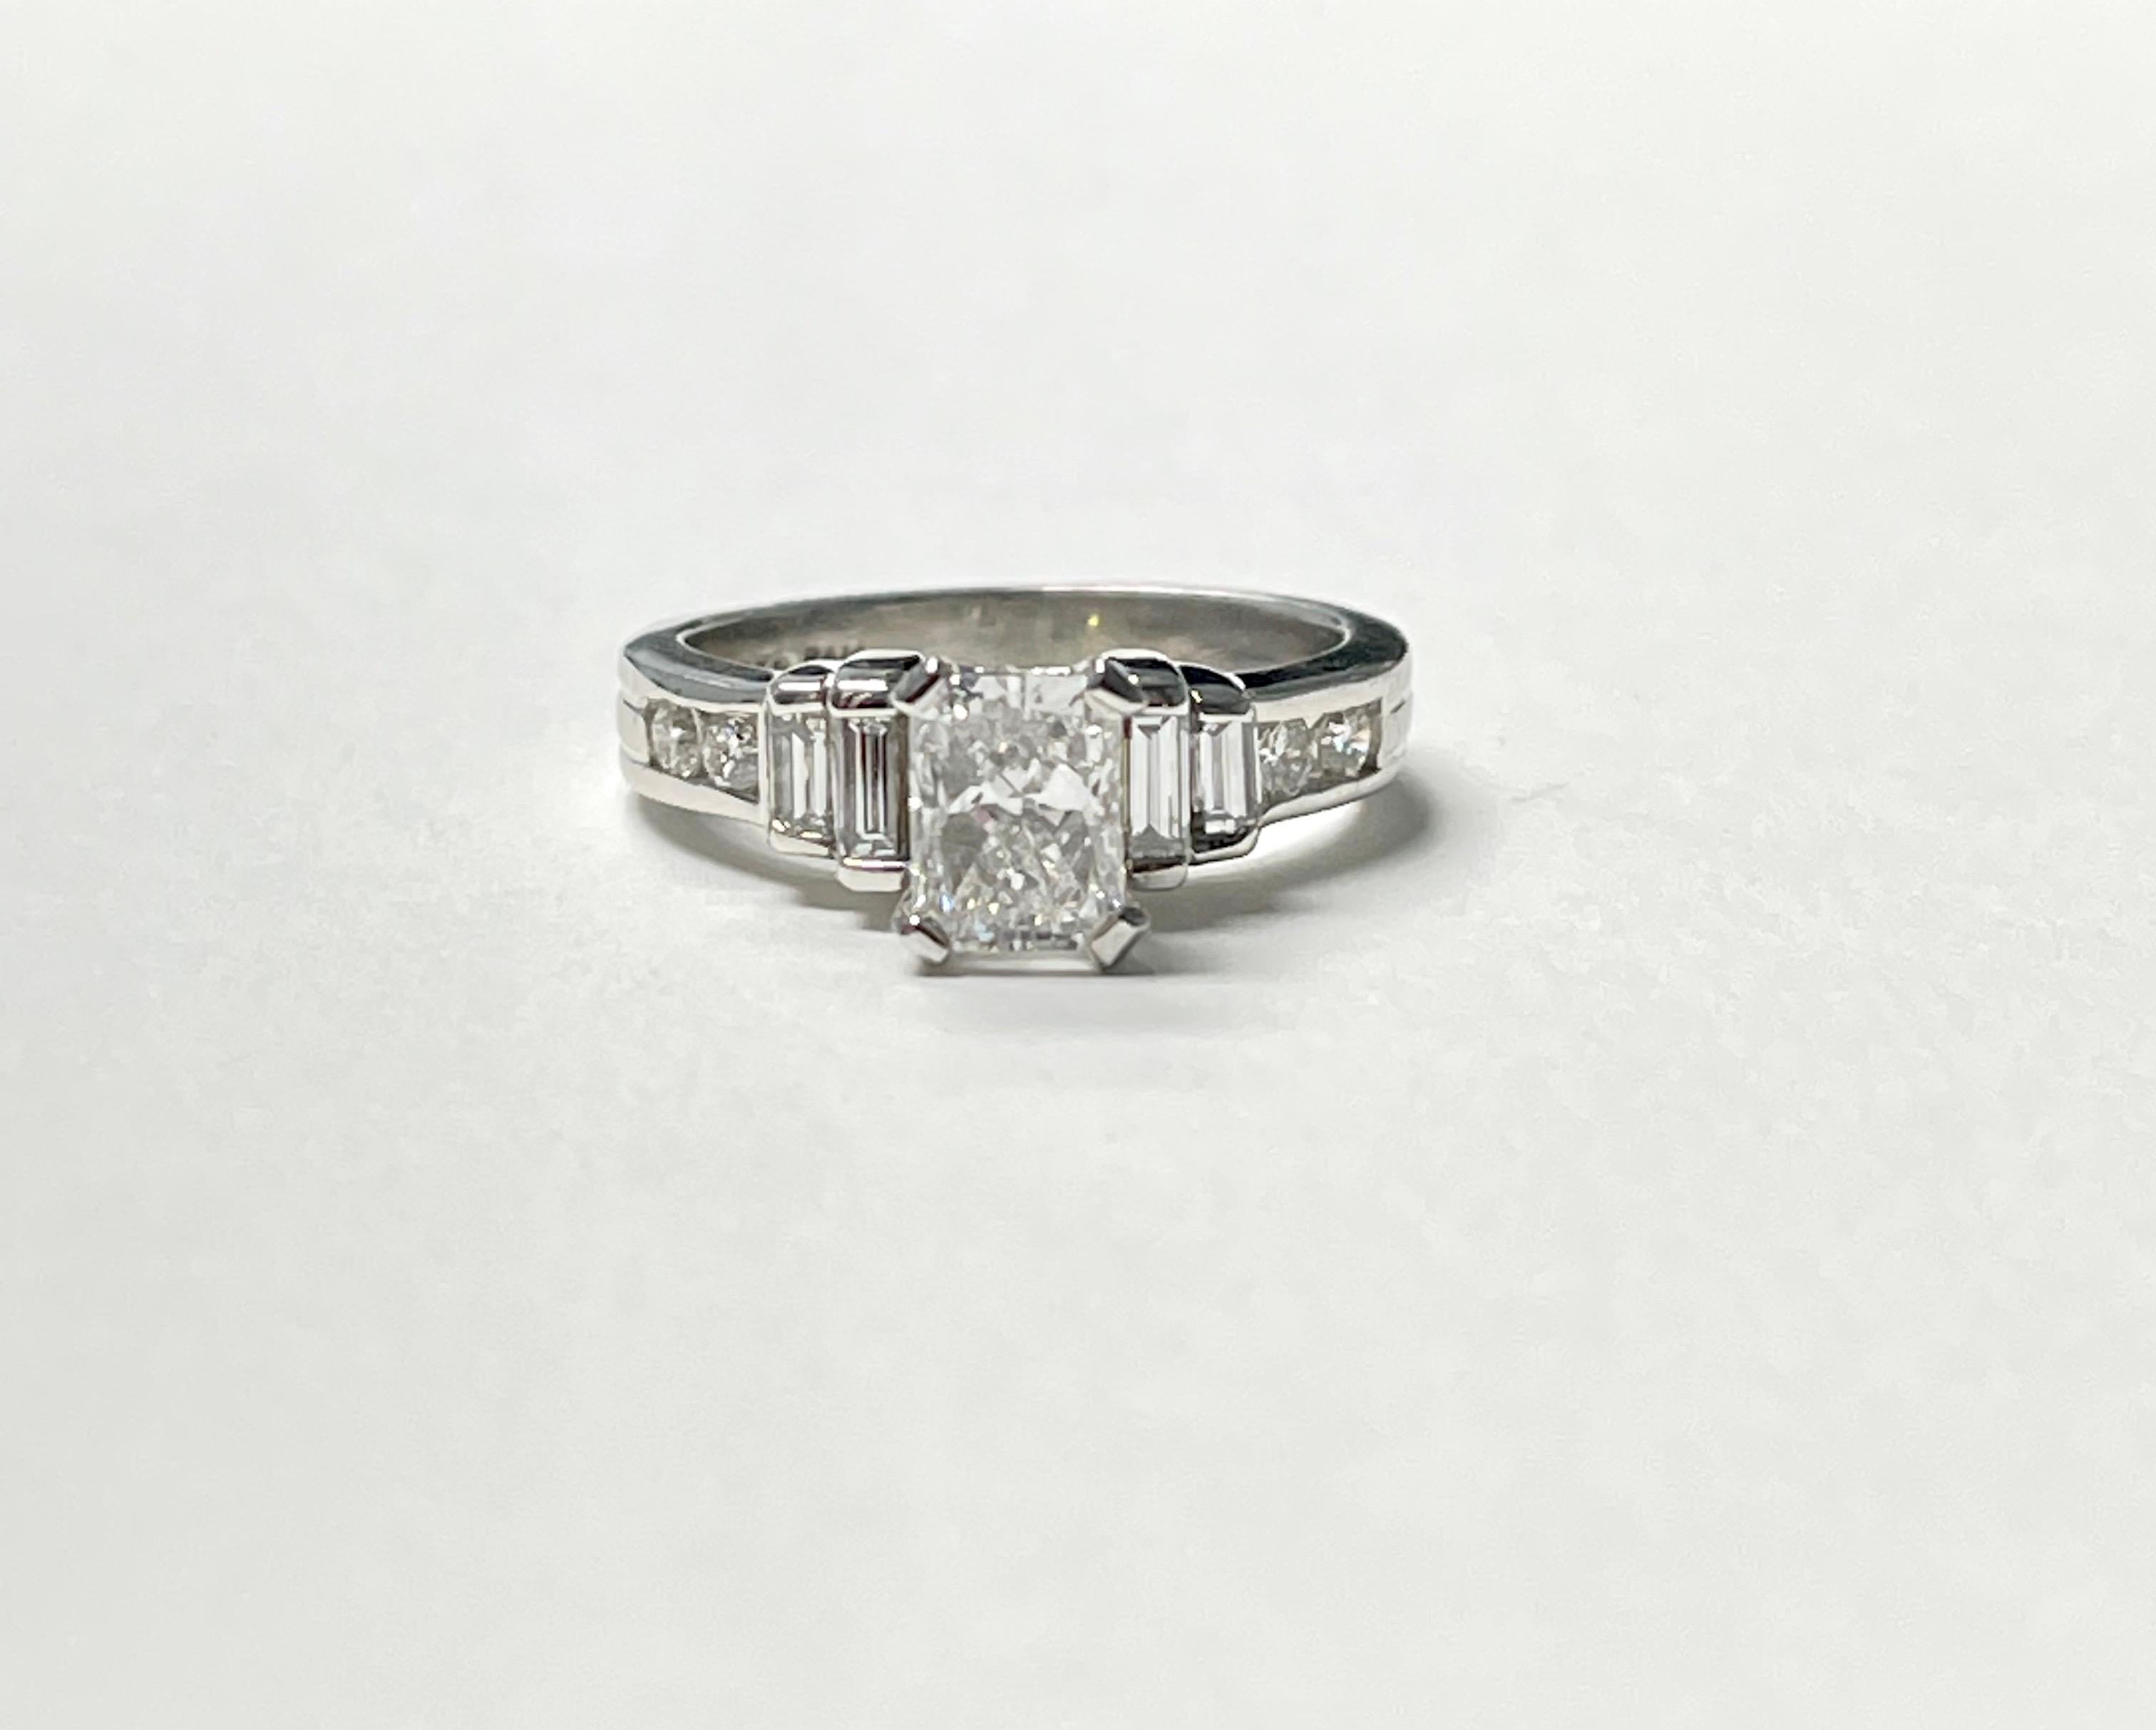 Contemporary GIA Certified 1.23 Carat Radiant Cut Diamond Engagement Ring in Platinum For Sale